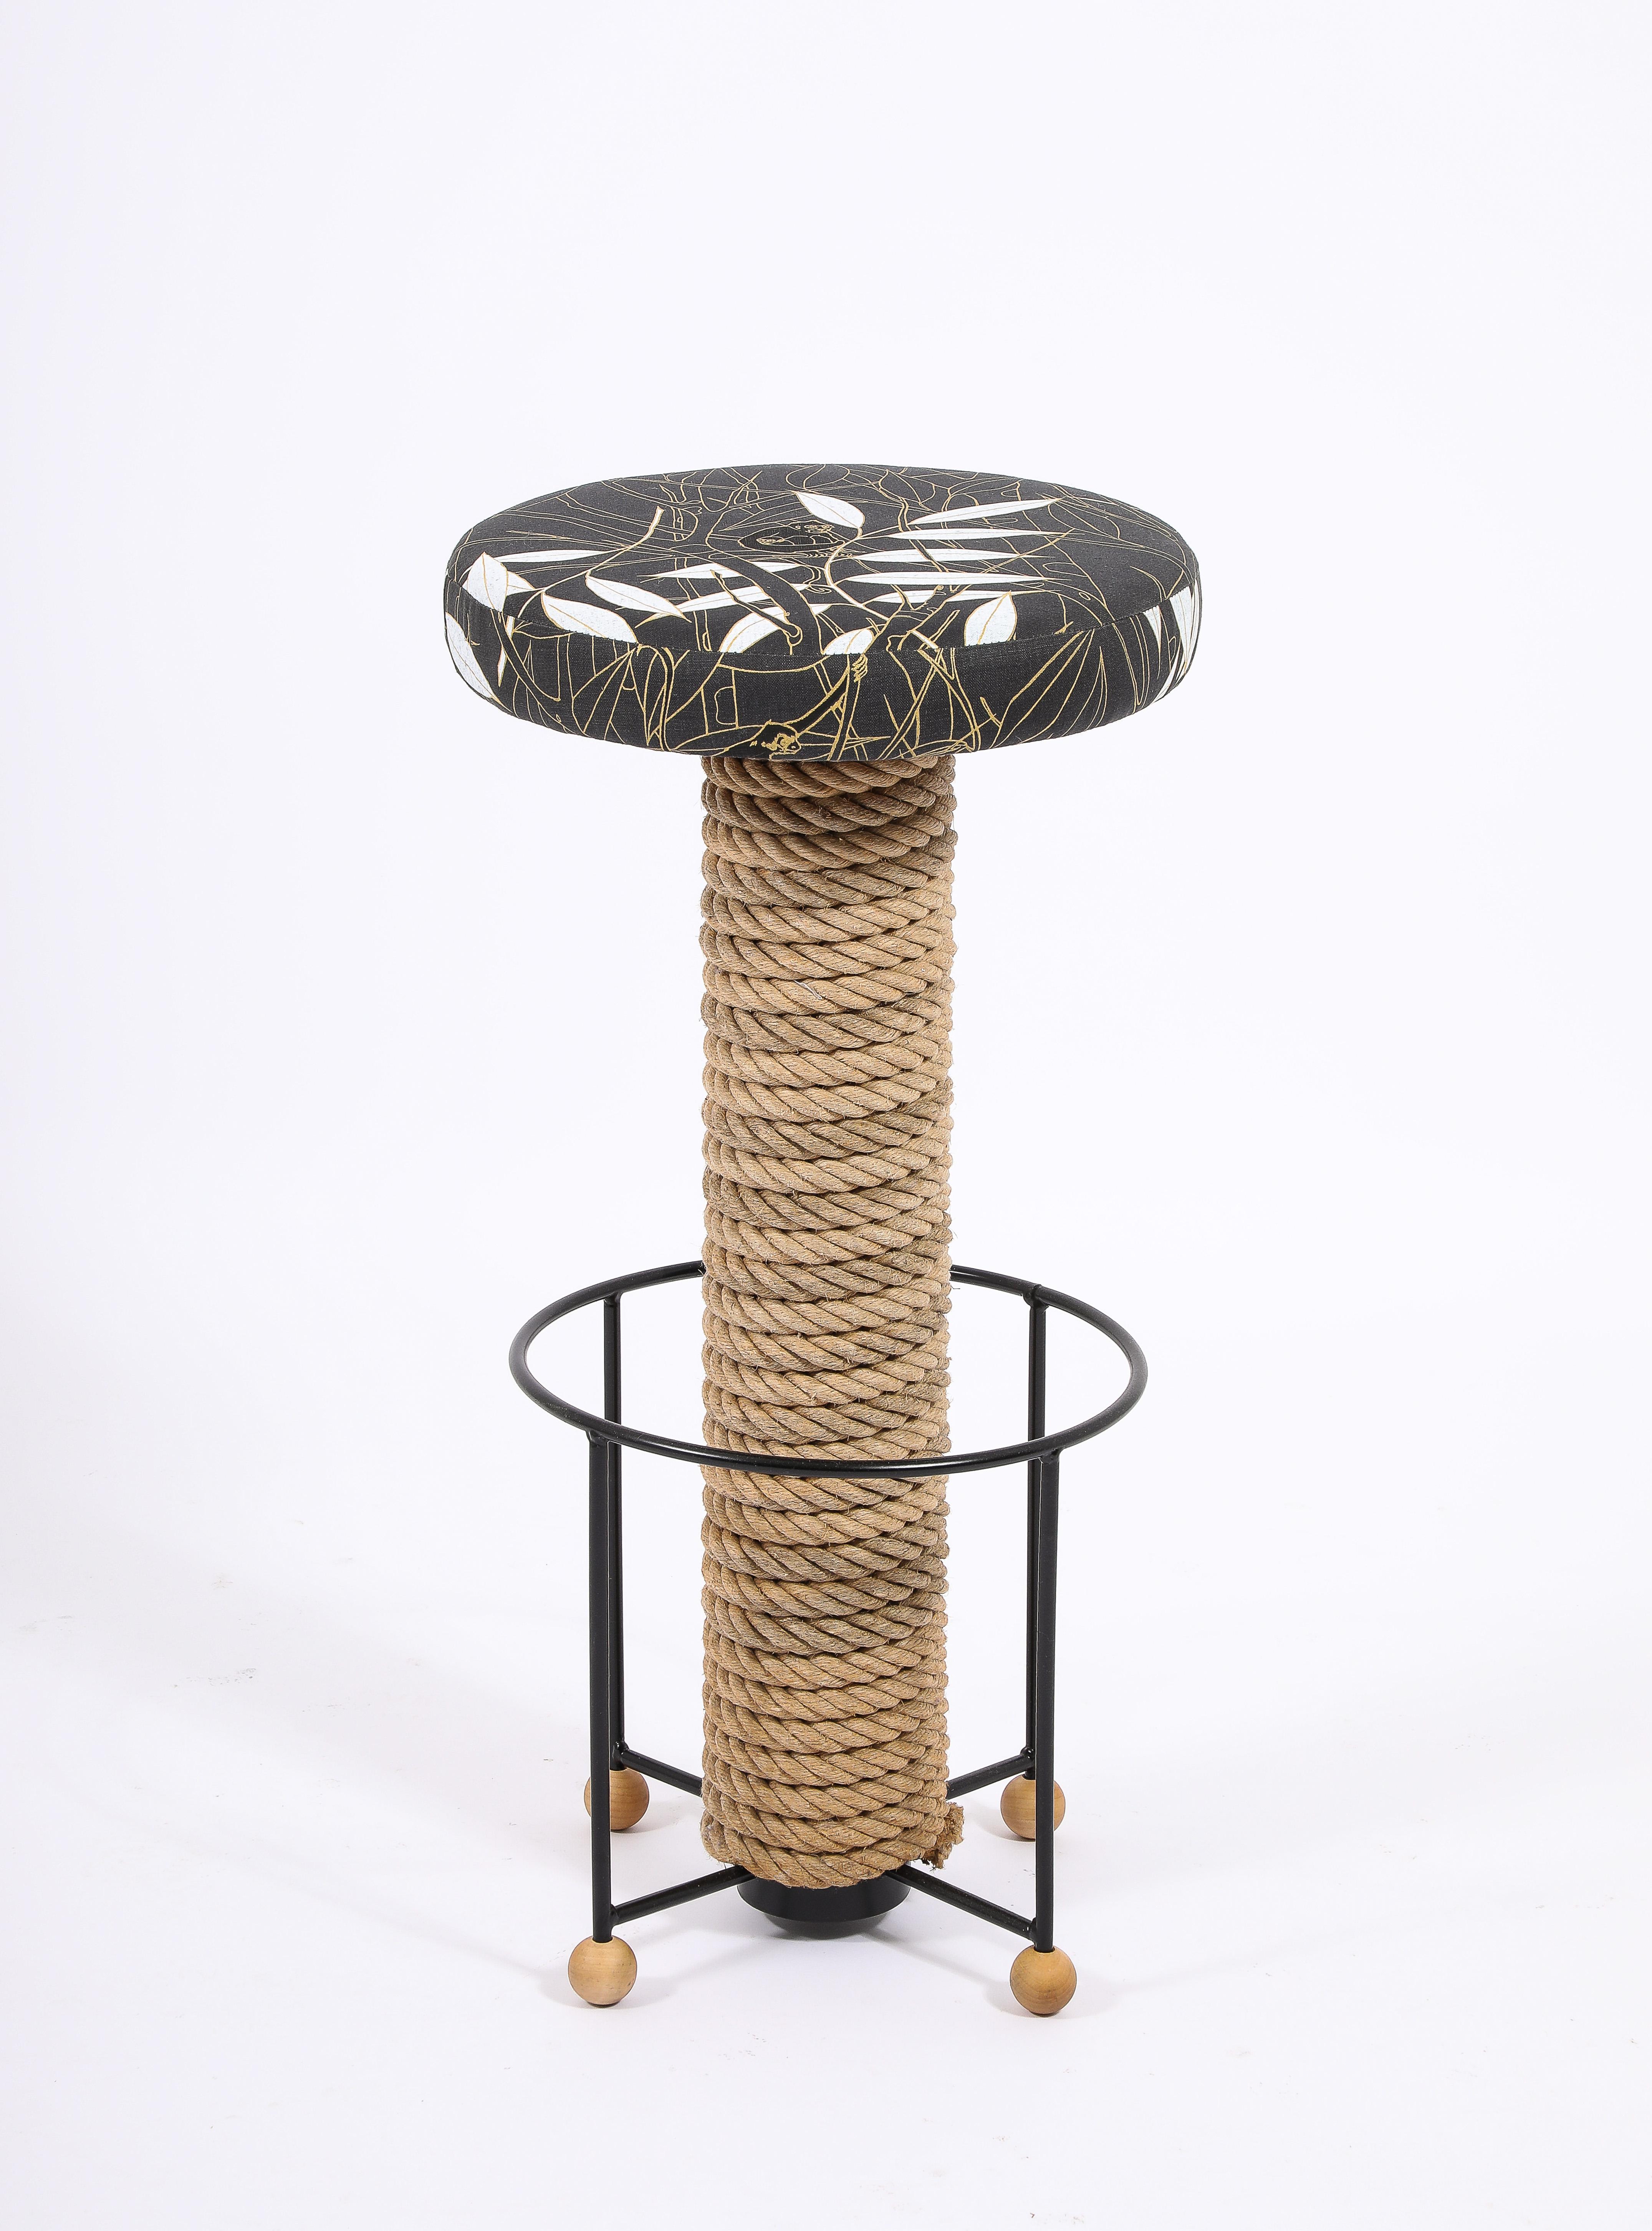 Barstools in wrought iron, the stem wrapped in thick natural rope on wooden ball feet.
